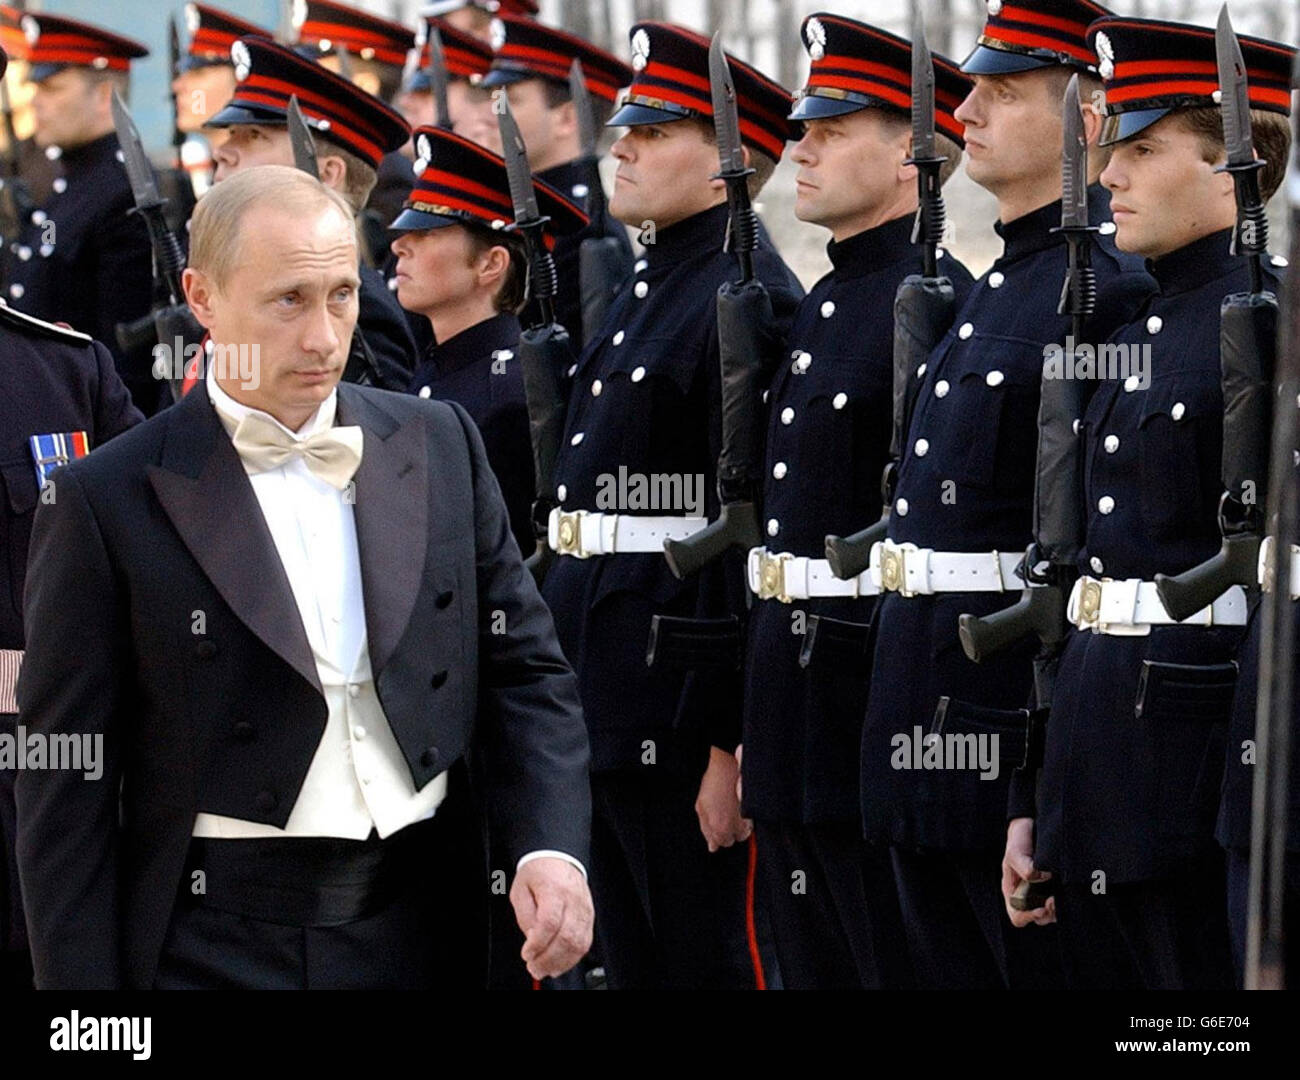 Russian President Vladimir Putin inspects an honour guard drawn from the Honourable Artillery Company at the Guildhall in London where the President and his wife, Lyudmila, are attending, a banquet hosted by the Lord Mayor of London. Stock Photo